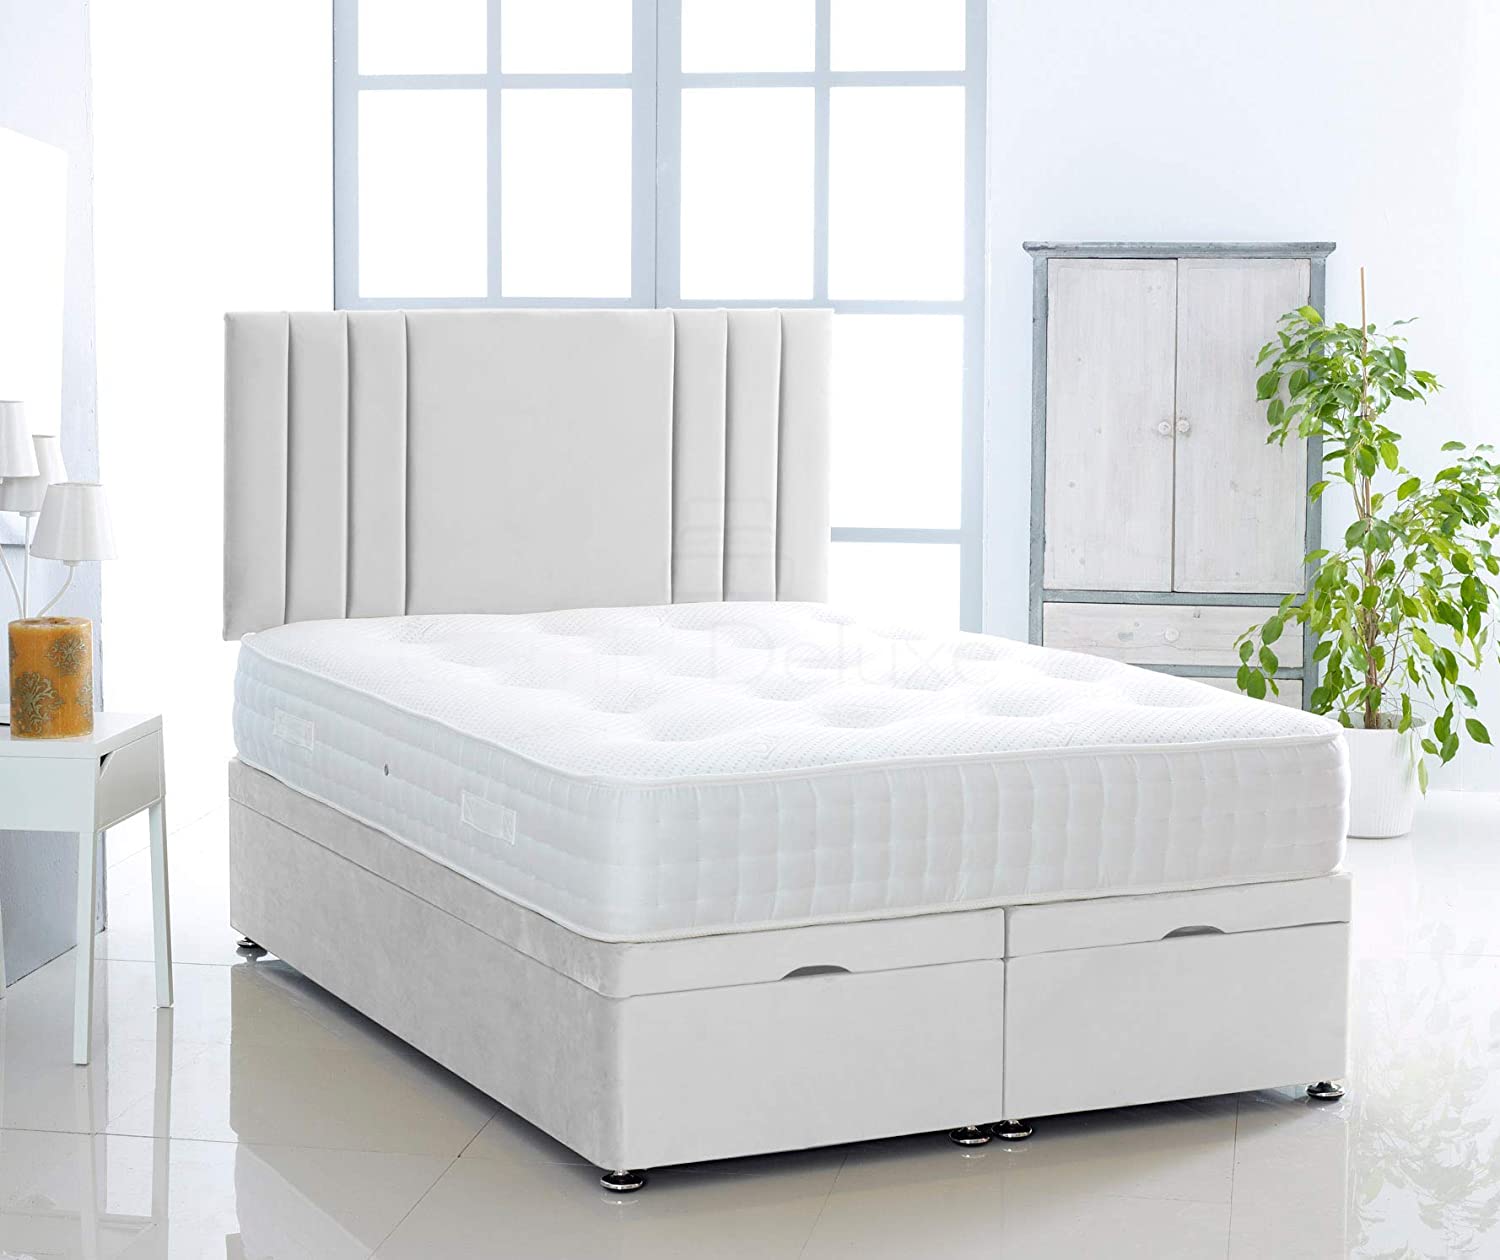 Plush Ottoman Storage Divan Bed With Vertical Lined Headboard